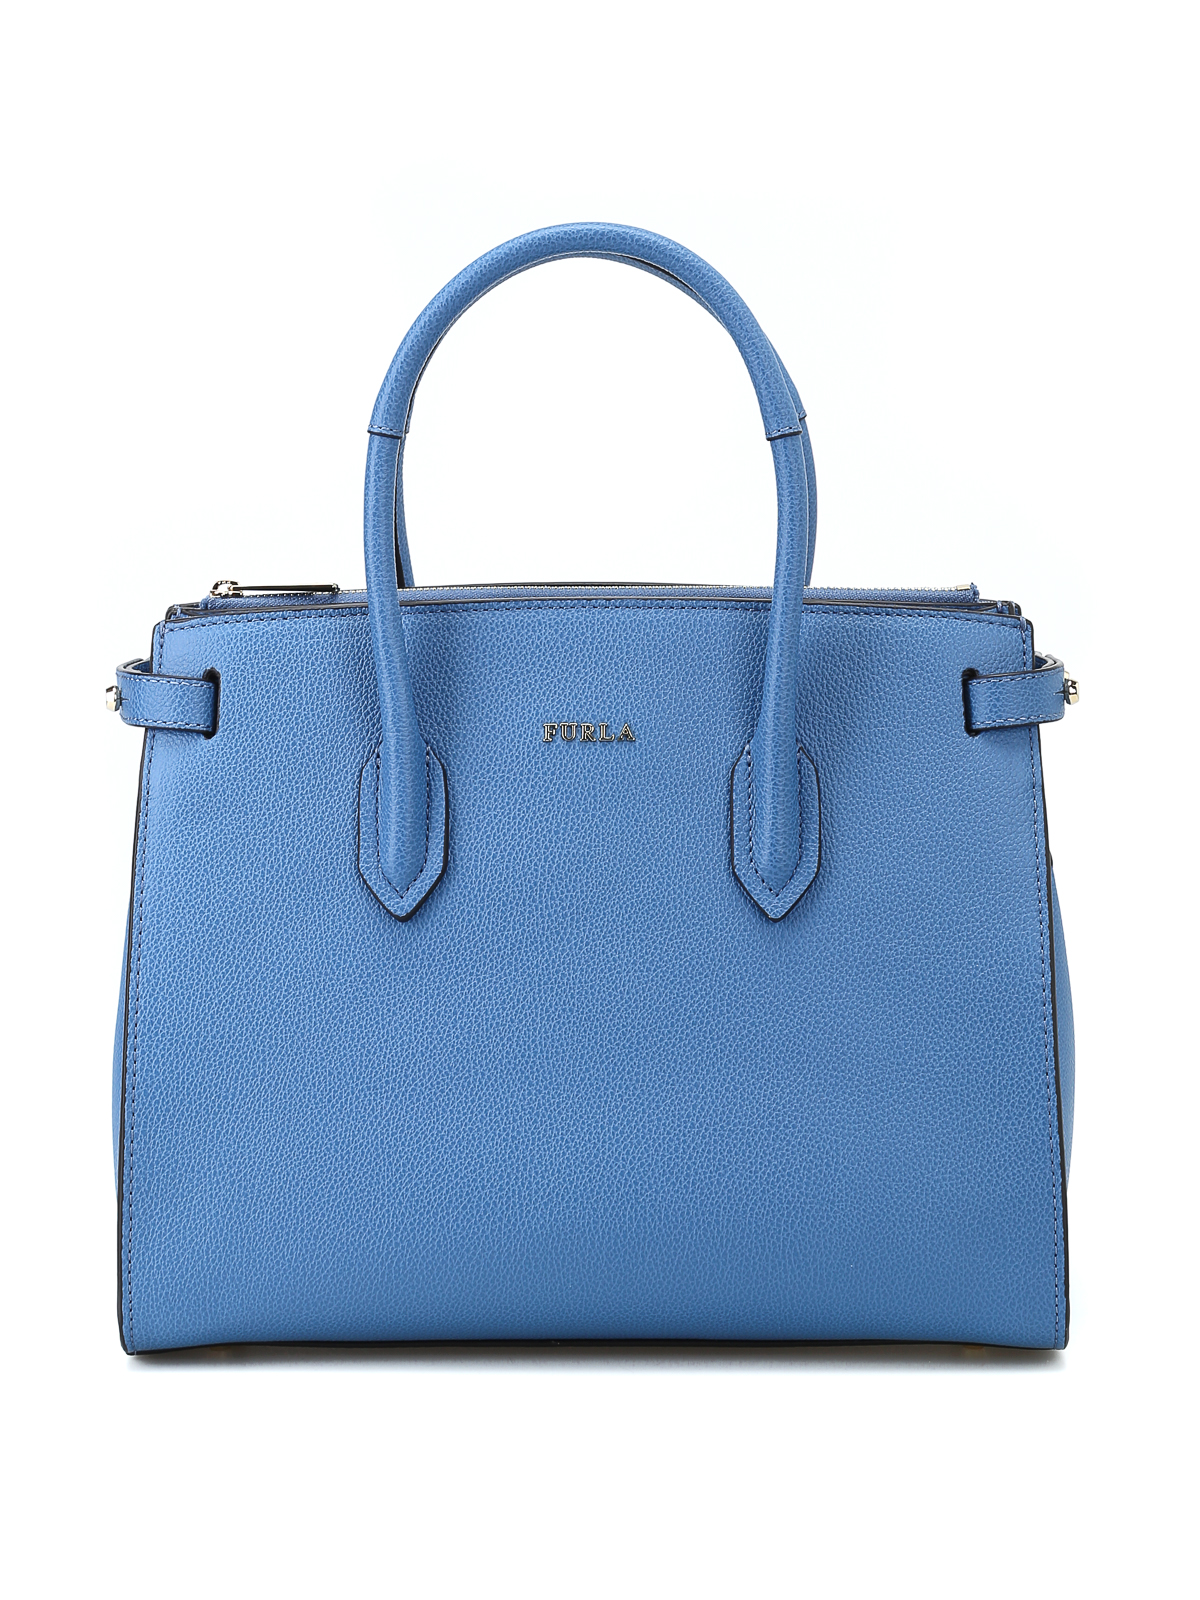 Totes bags Furla - Pin cobalt blue leather small tote - 963105 | iKRIX.com